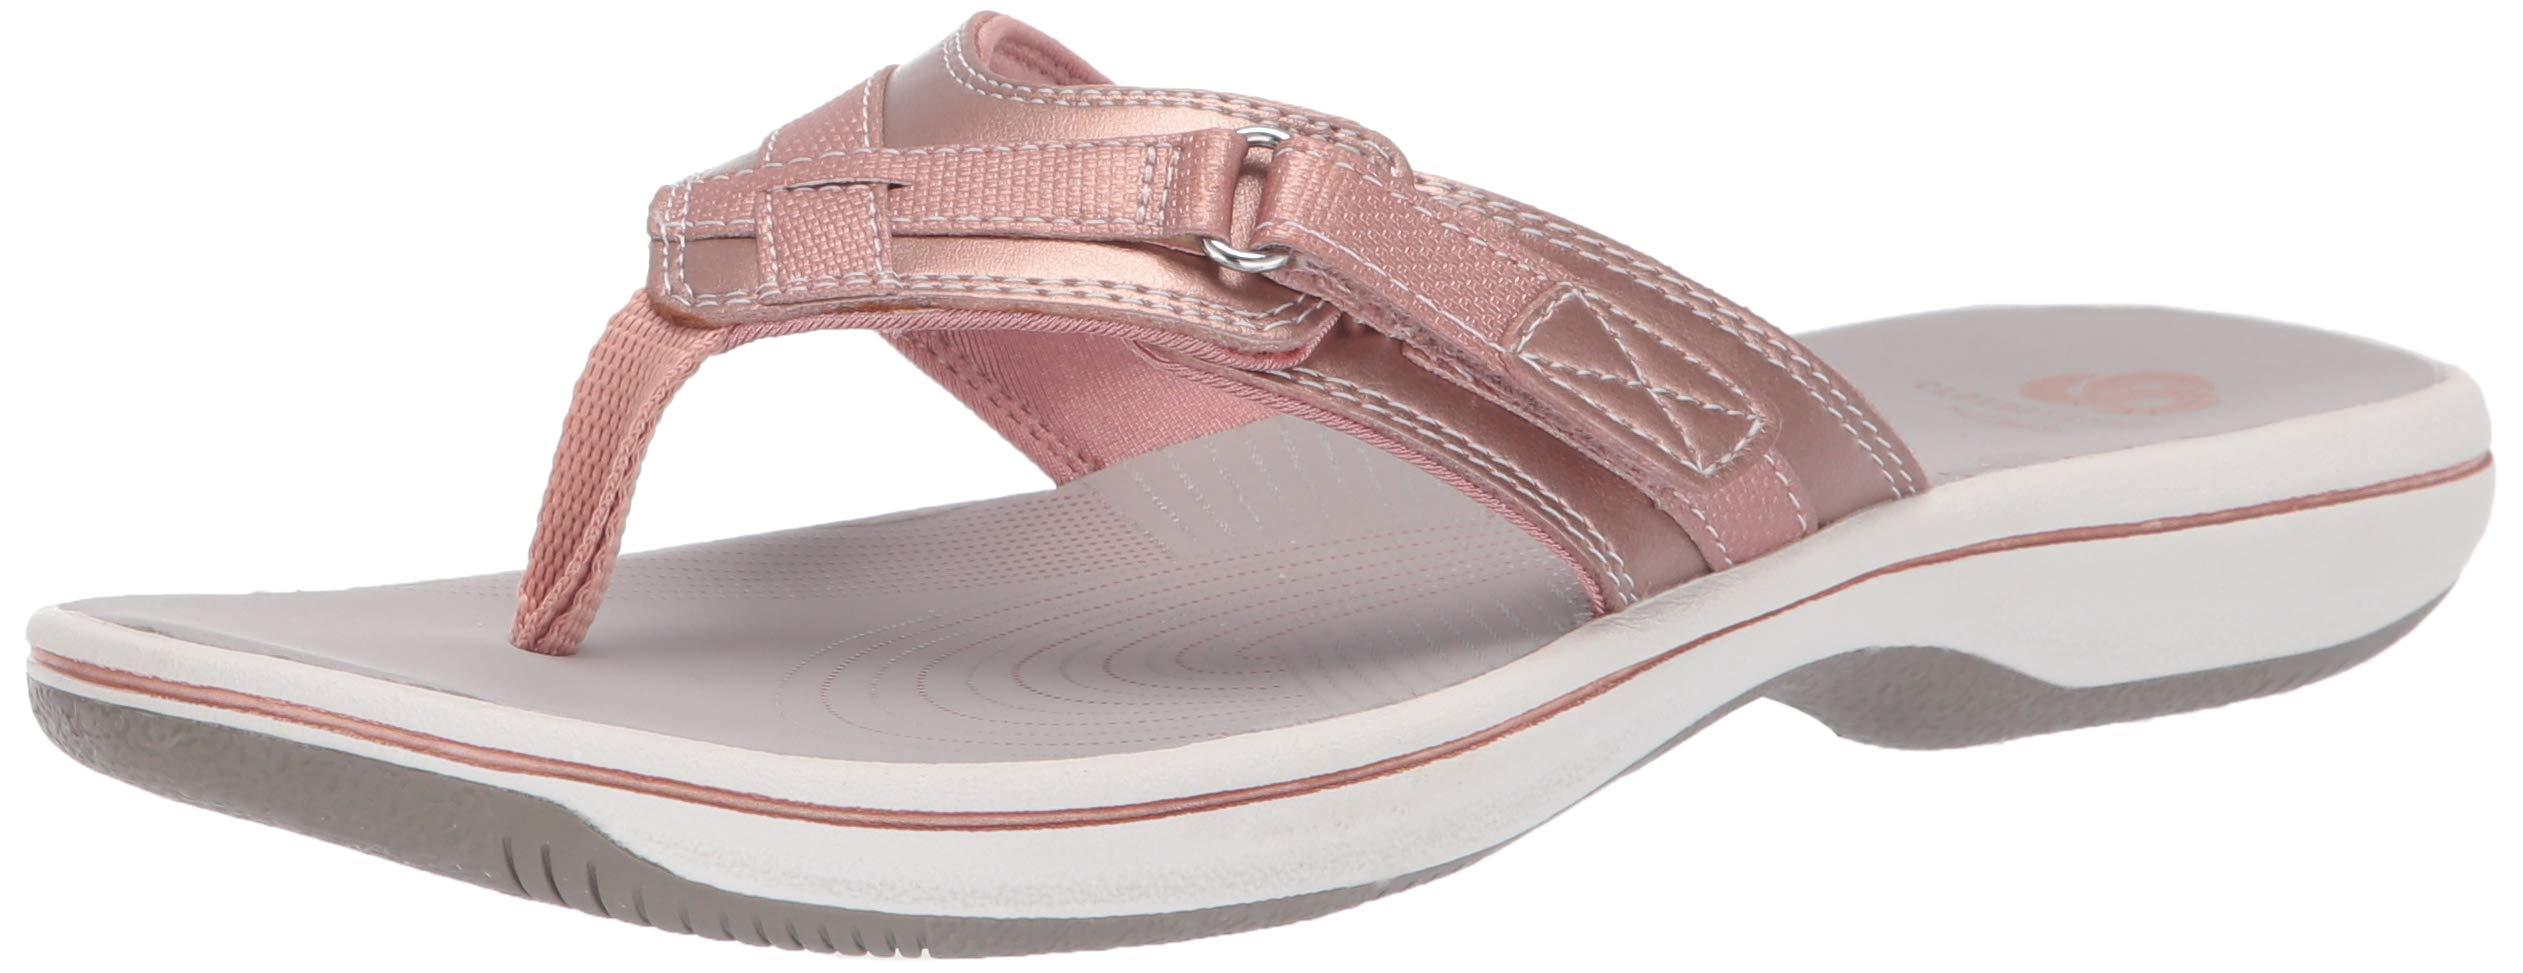 Clarks Synthetic Brinkley Sea Flip Flops in Rose Gold (Pink) - Save 45% |  Lyst